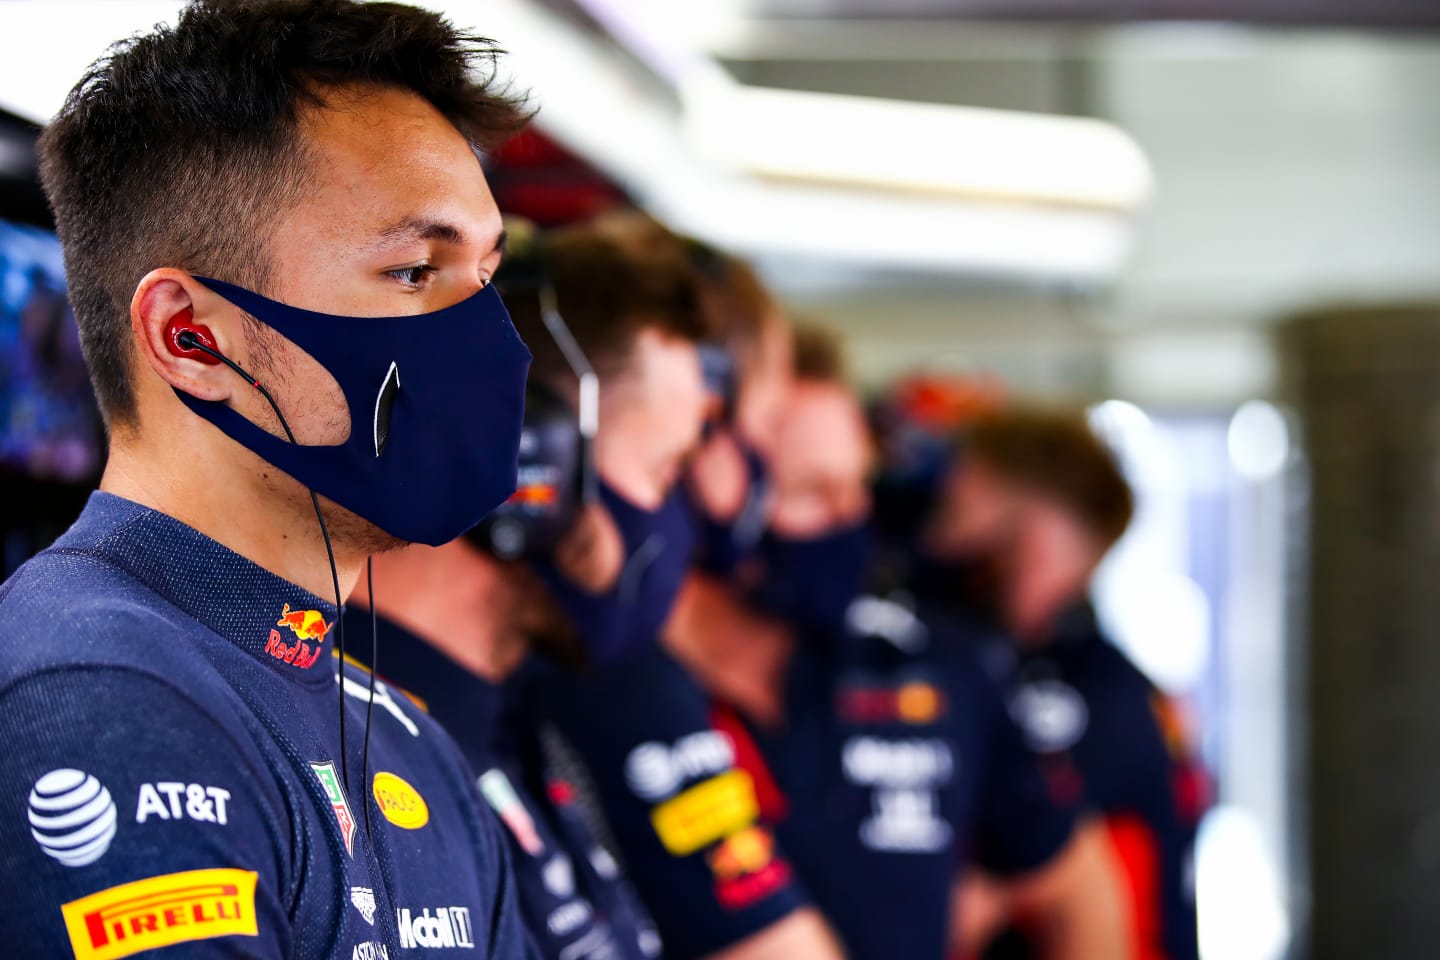 NORTHAMPTON, ENGLAND - AUGUST 08: Alexander Albon of Thailand and Red Bull Racing looks on in the